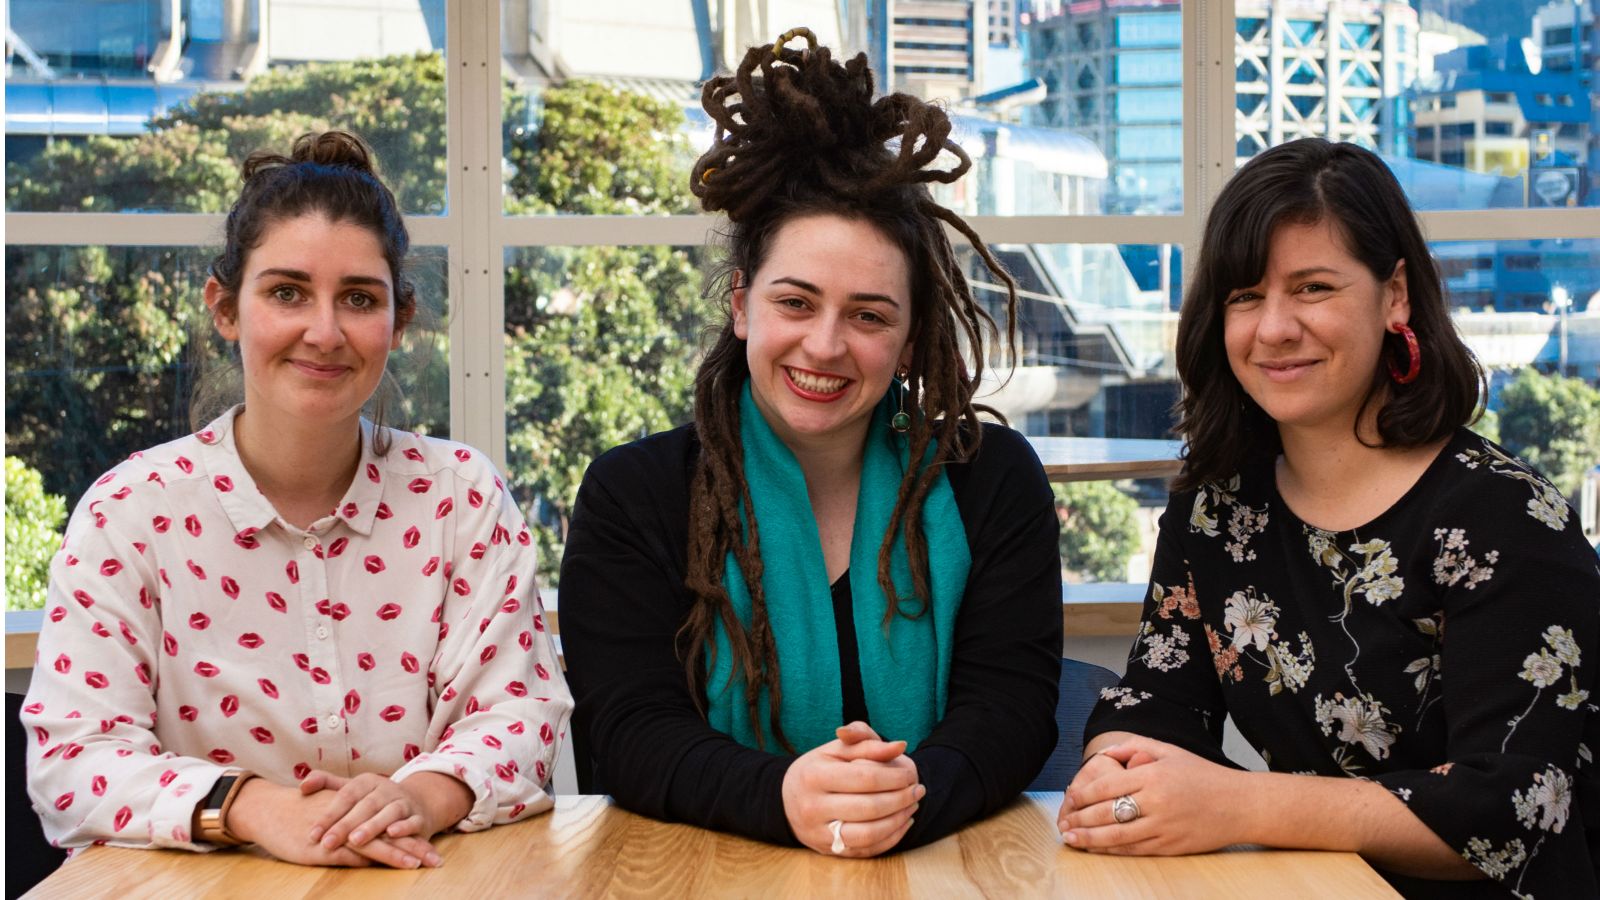 CoLiberate cofounders and Wellington's most influential health and science workers, Sarah Tuck, Bop Murdoch, and Jody Burrell.